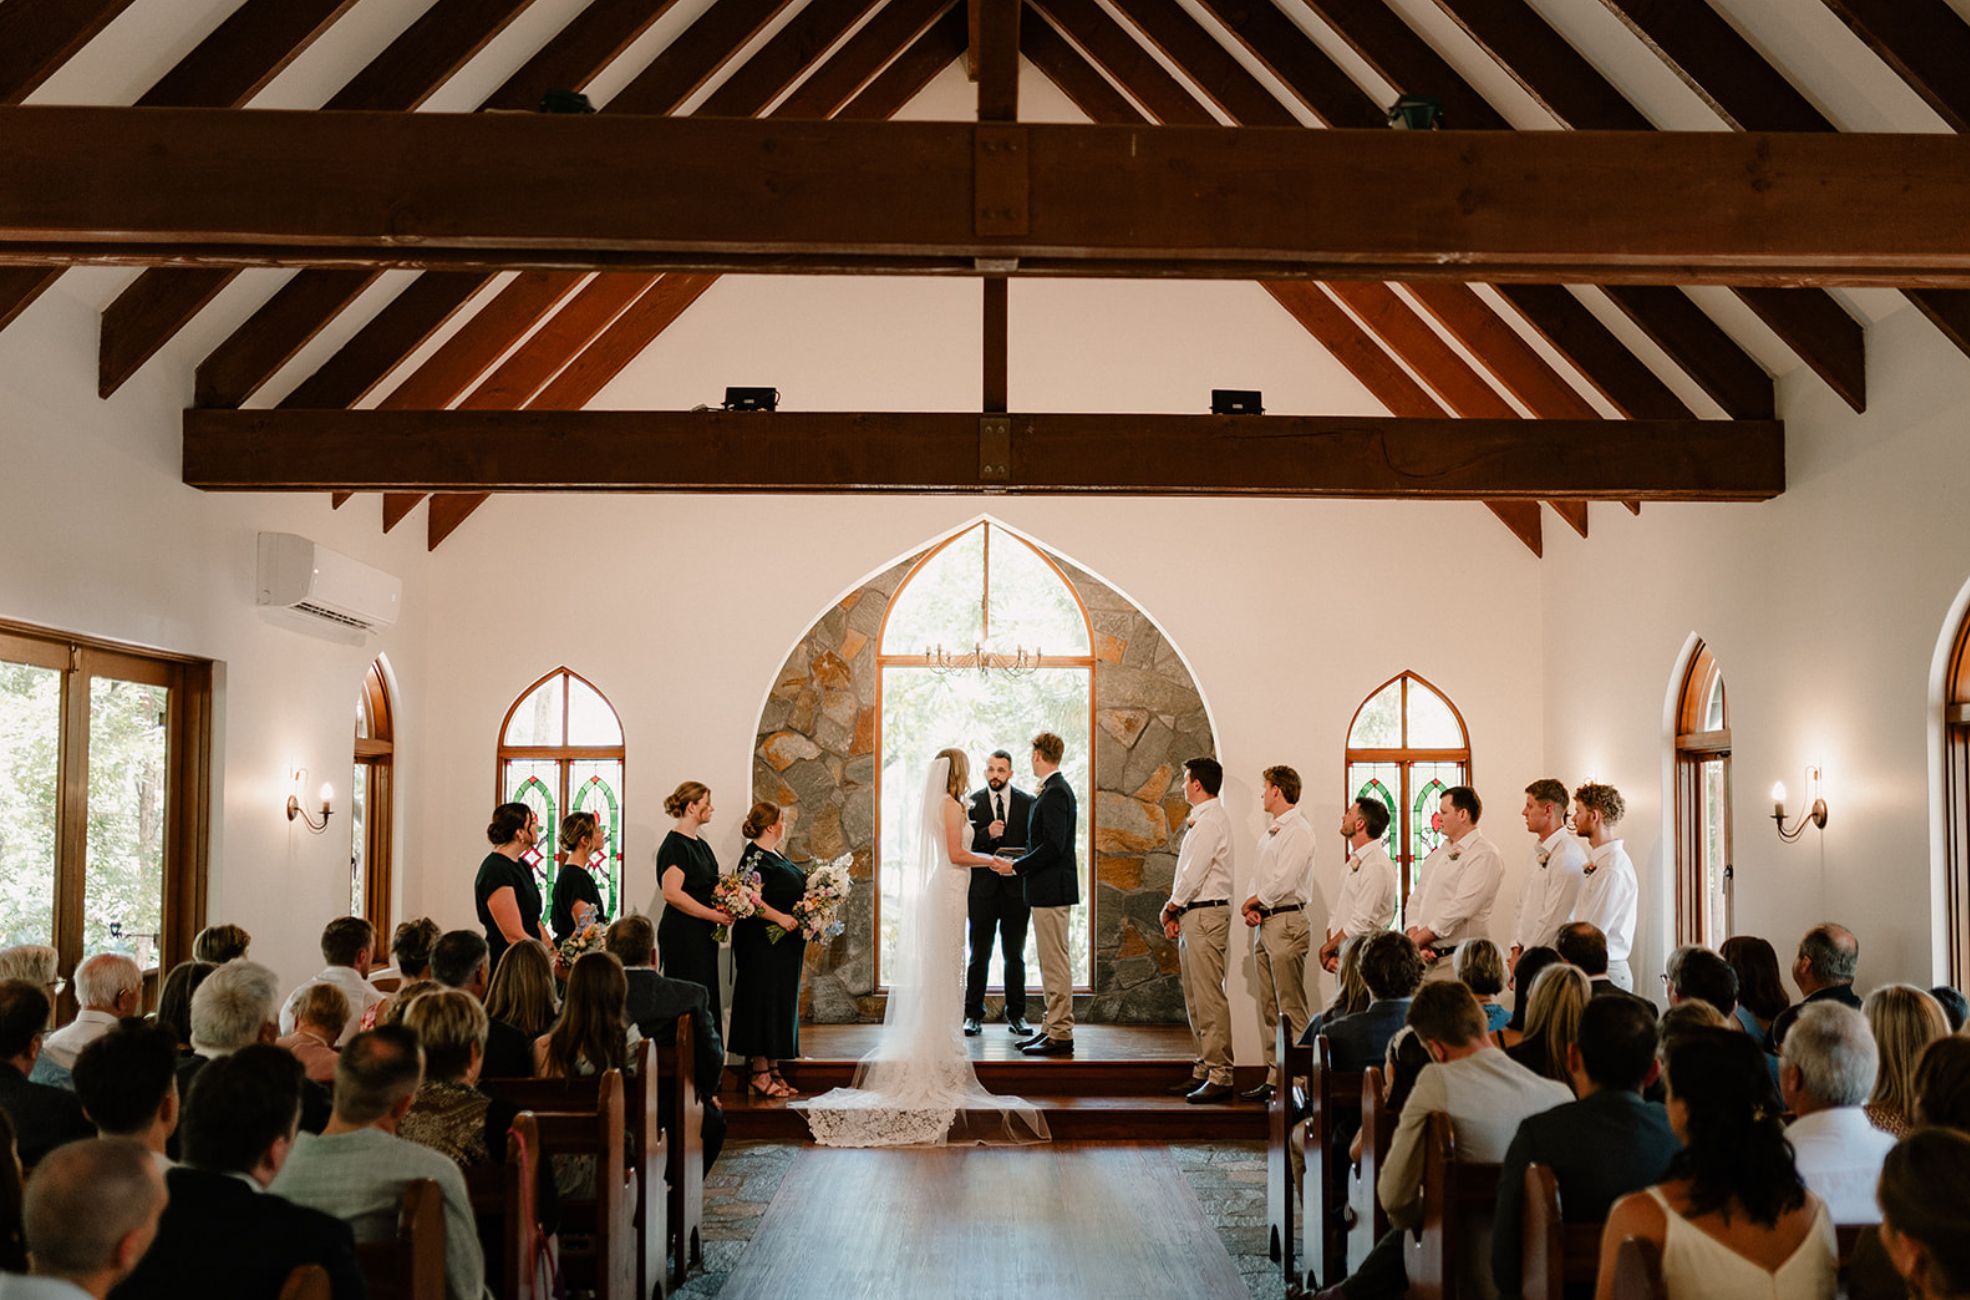 Chapel Wedding At Coolibah Downs On The Gold Coast